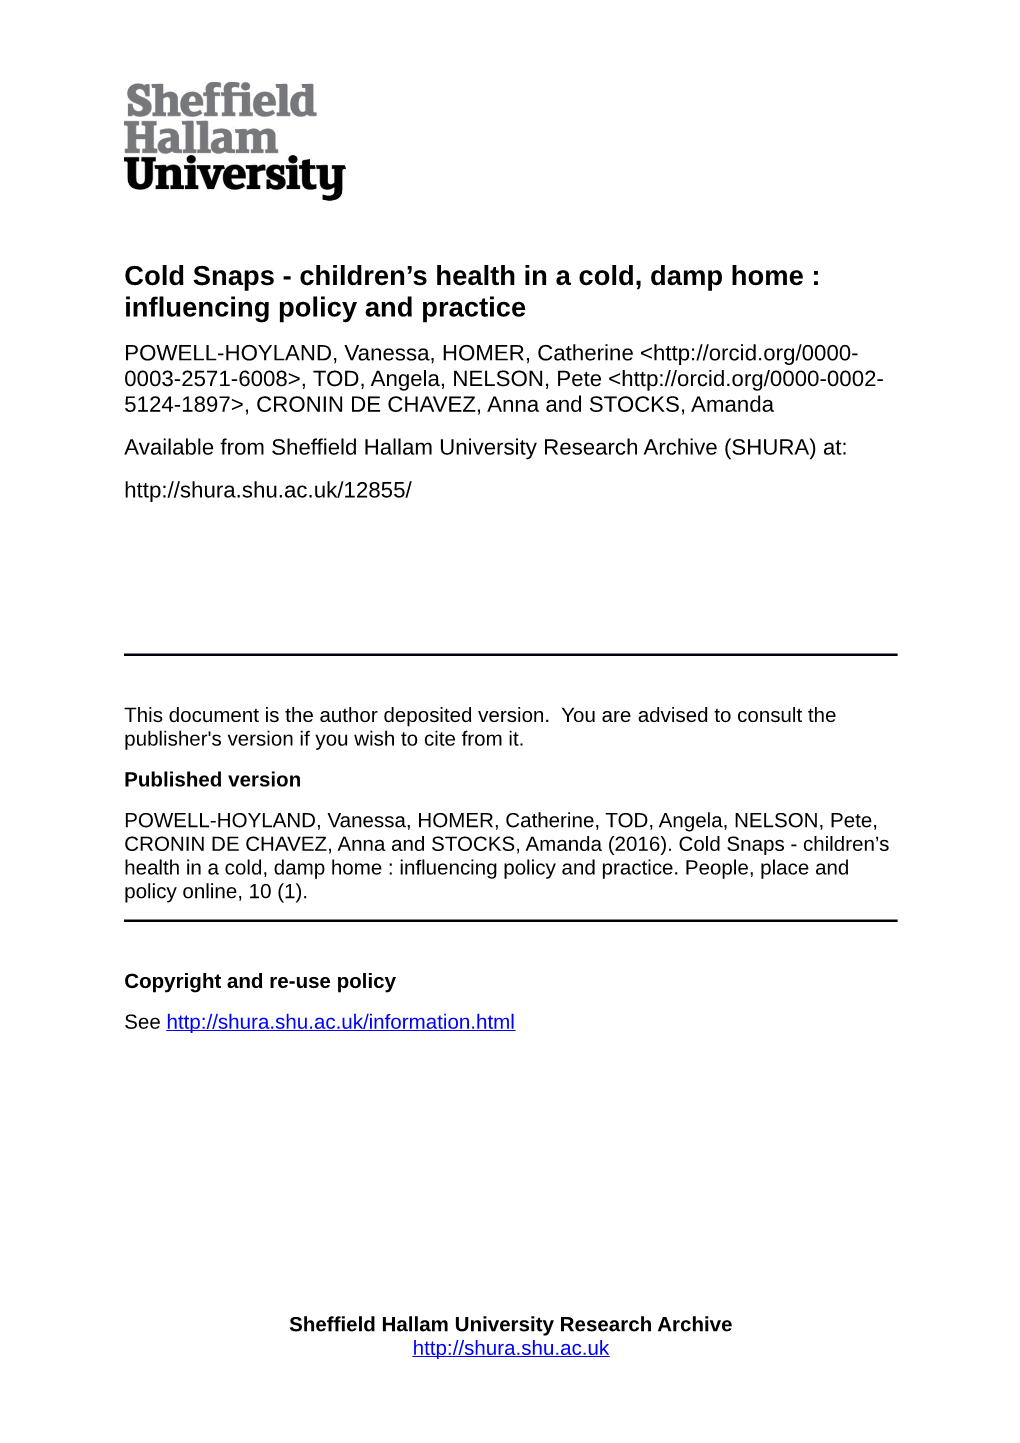 Children's Health in a Cold, Damp Home : Influencing Policy and Practice